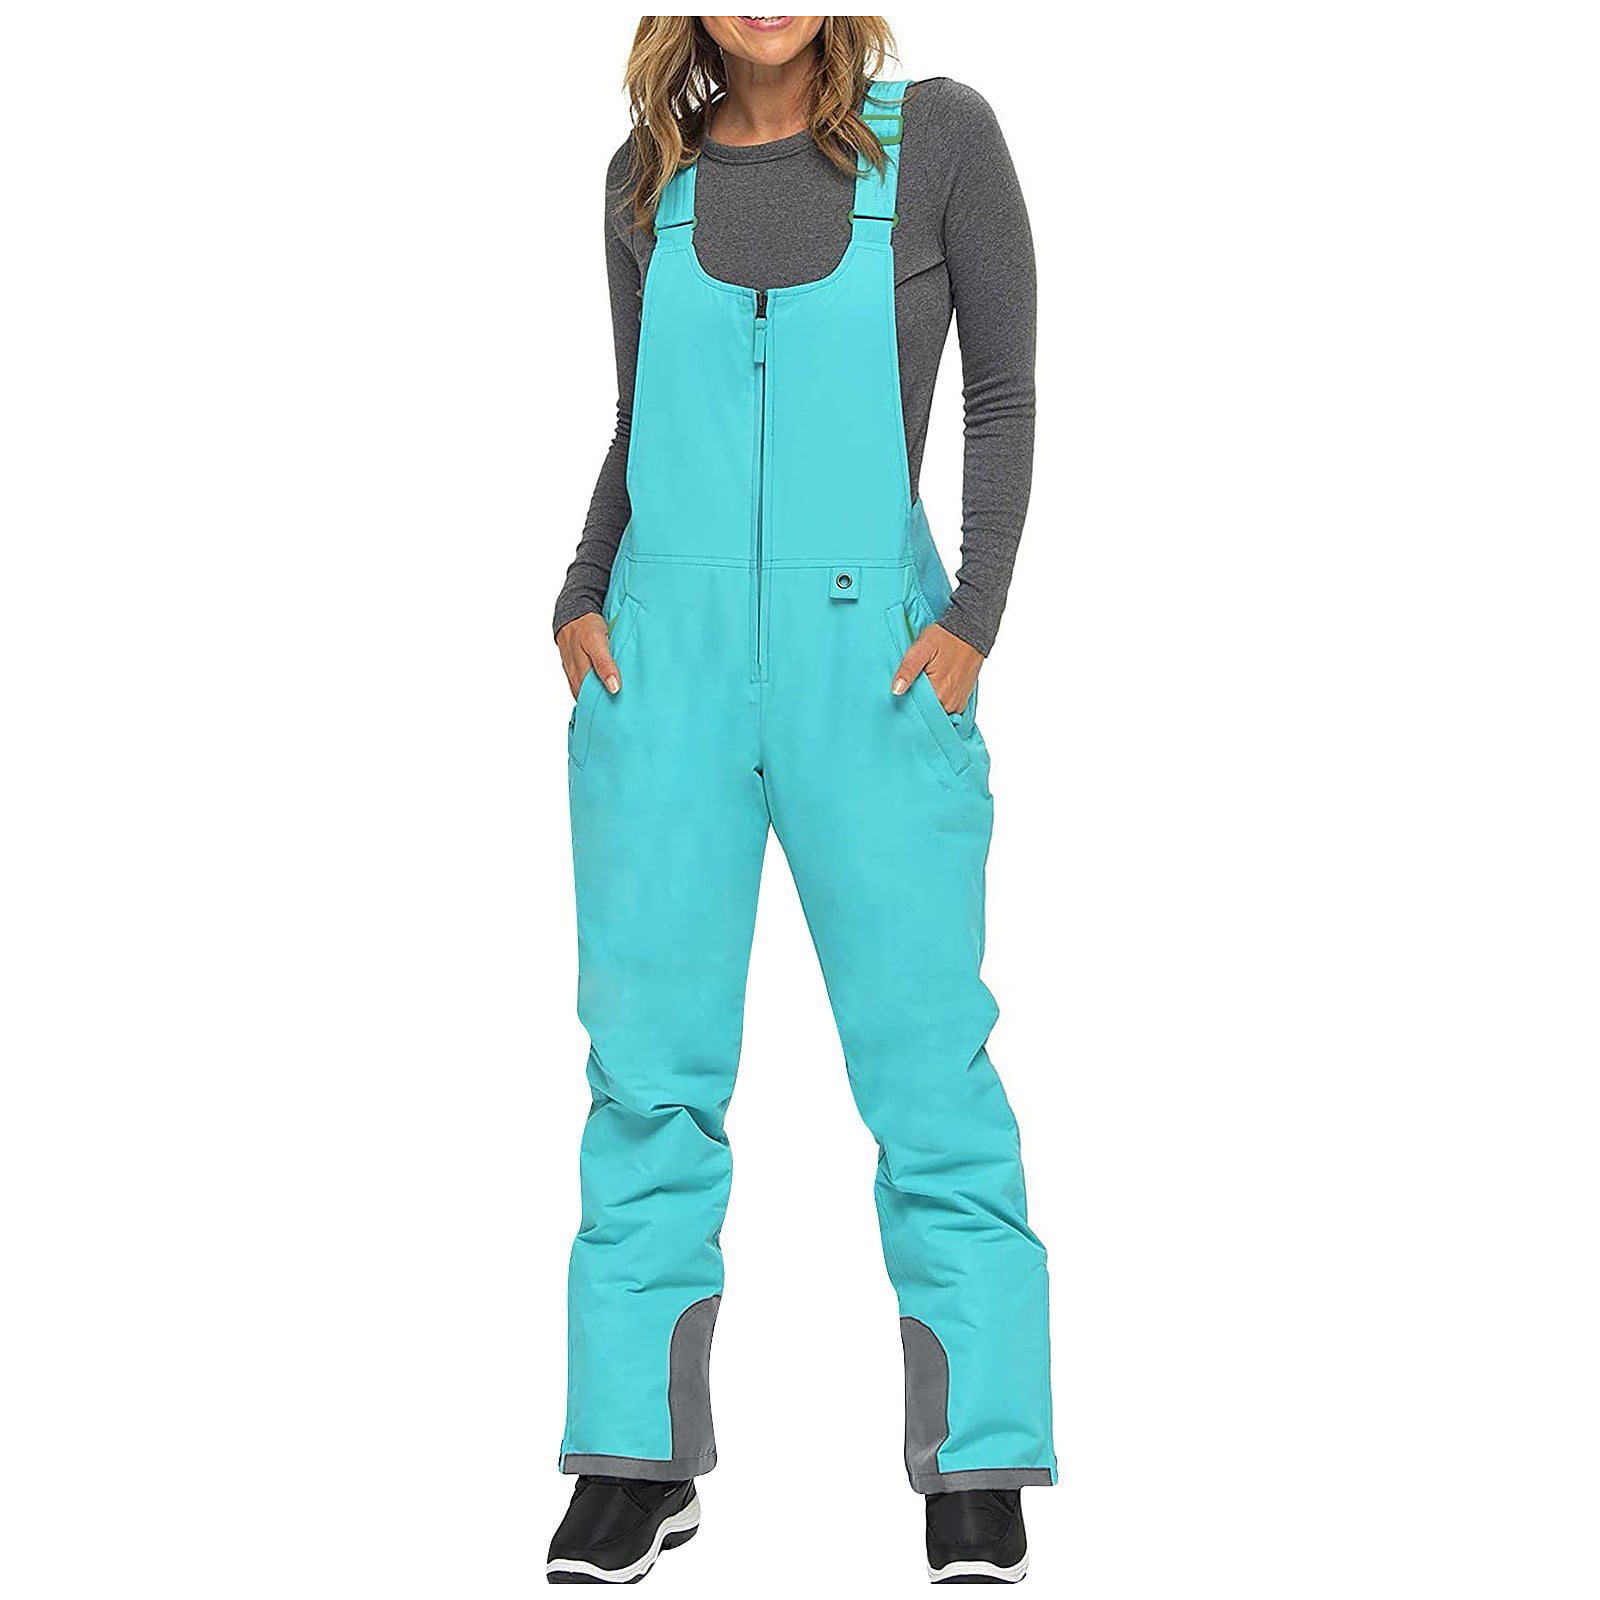 Women Insulated Bib Overalls Solid Color Pocket One-Piece Suspenders Snow Pants Winter Outdoor Sports Jumpsuit Trousers